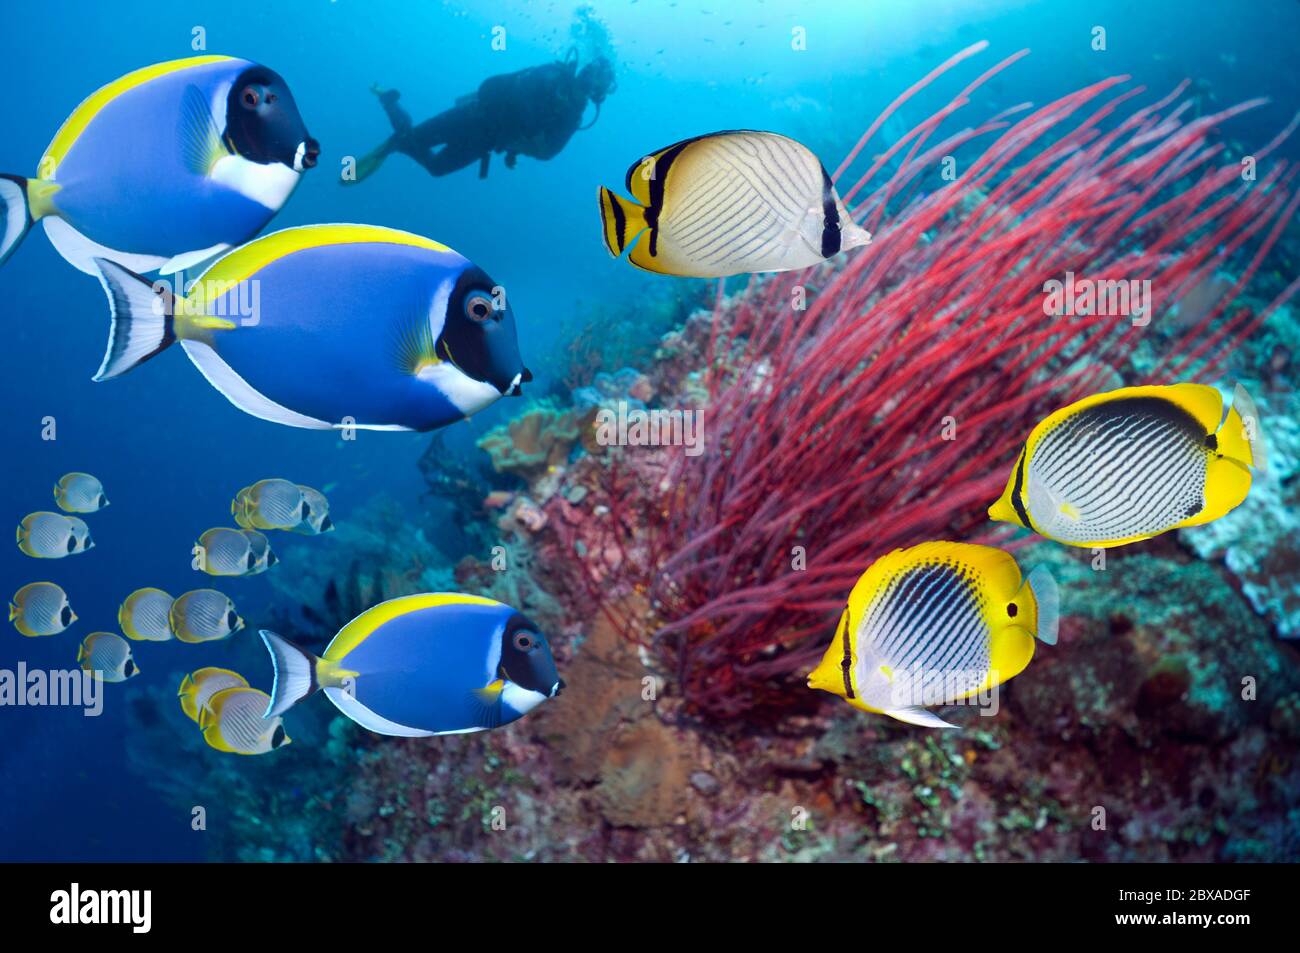 Coral reef scenery with tropical fish and a scuba diver.  Indonesia. Stock Photo